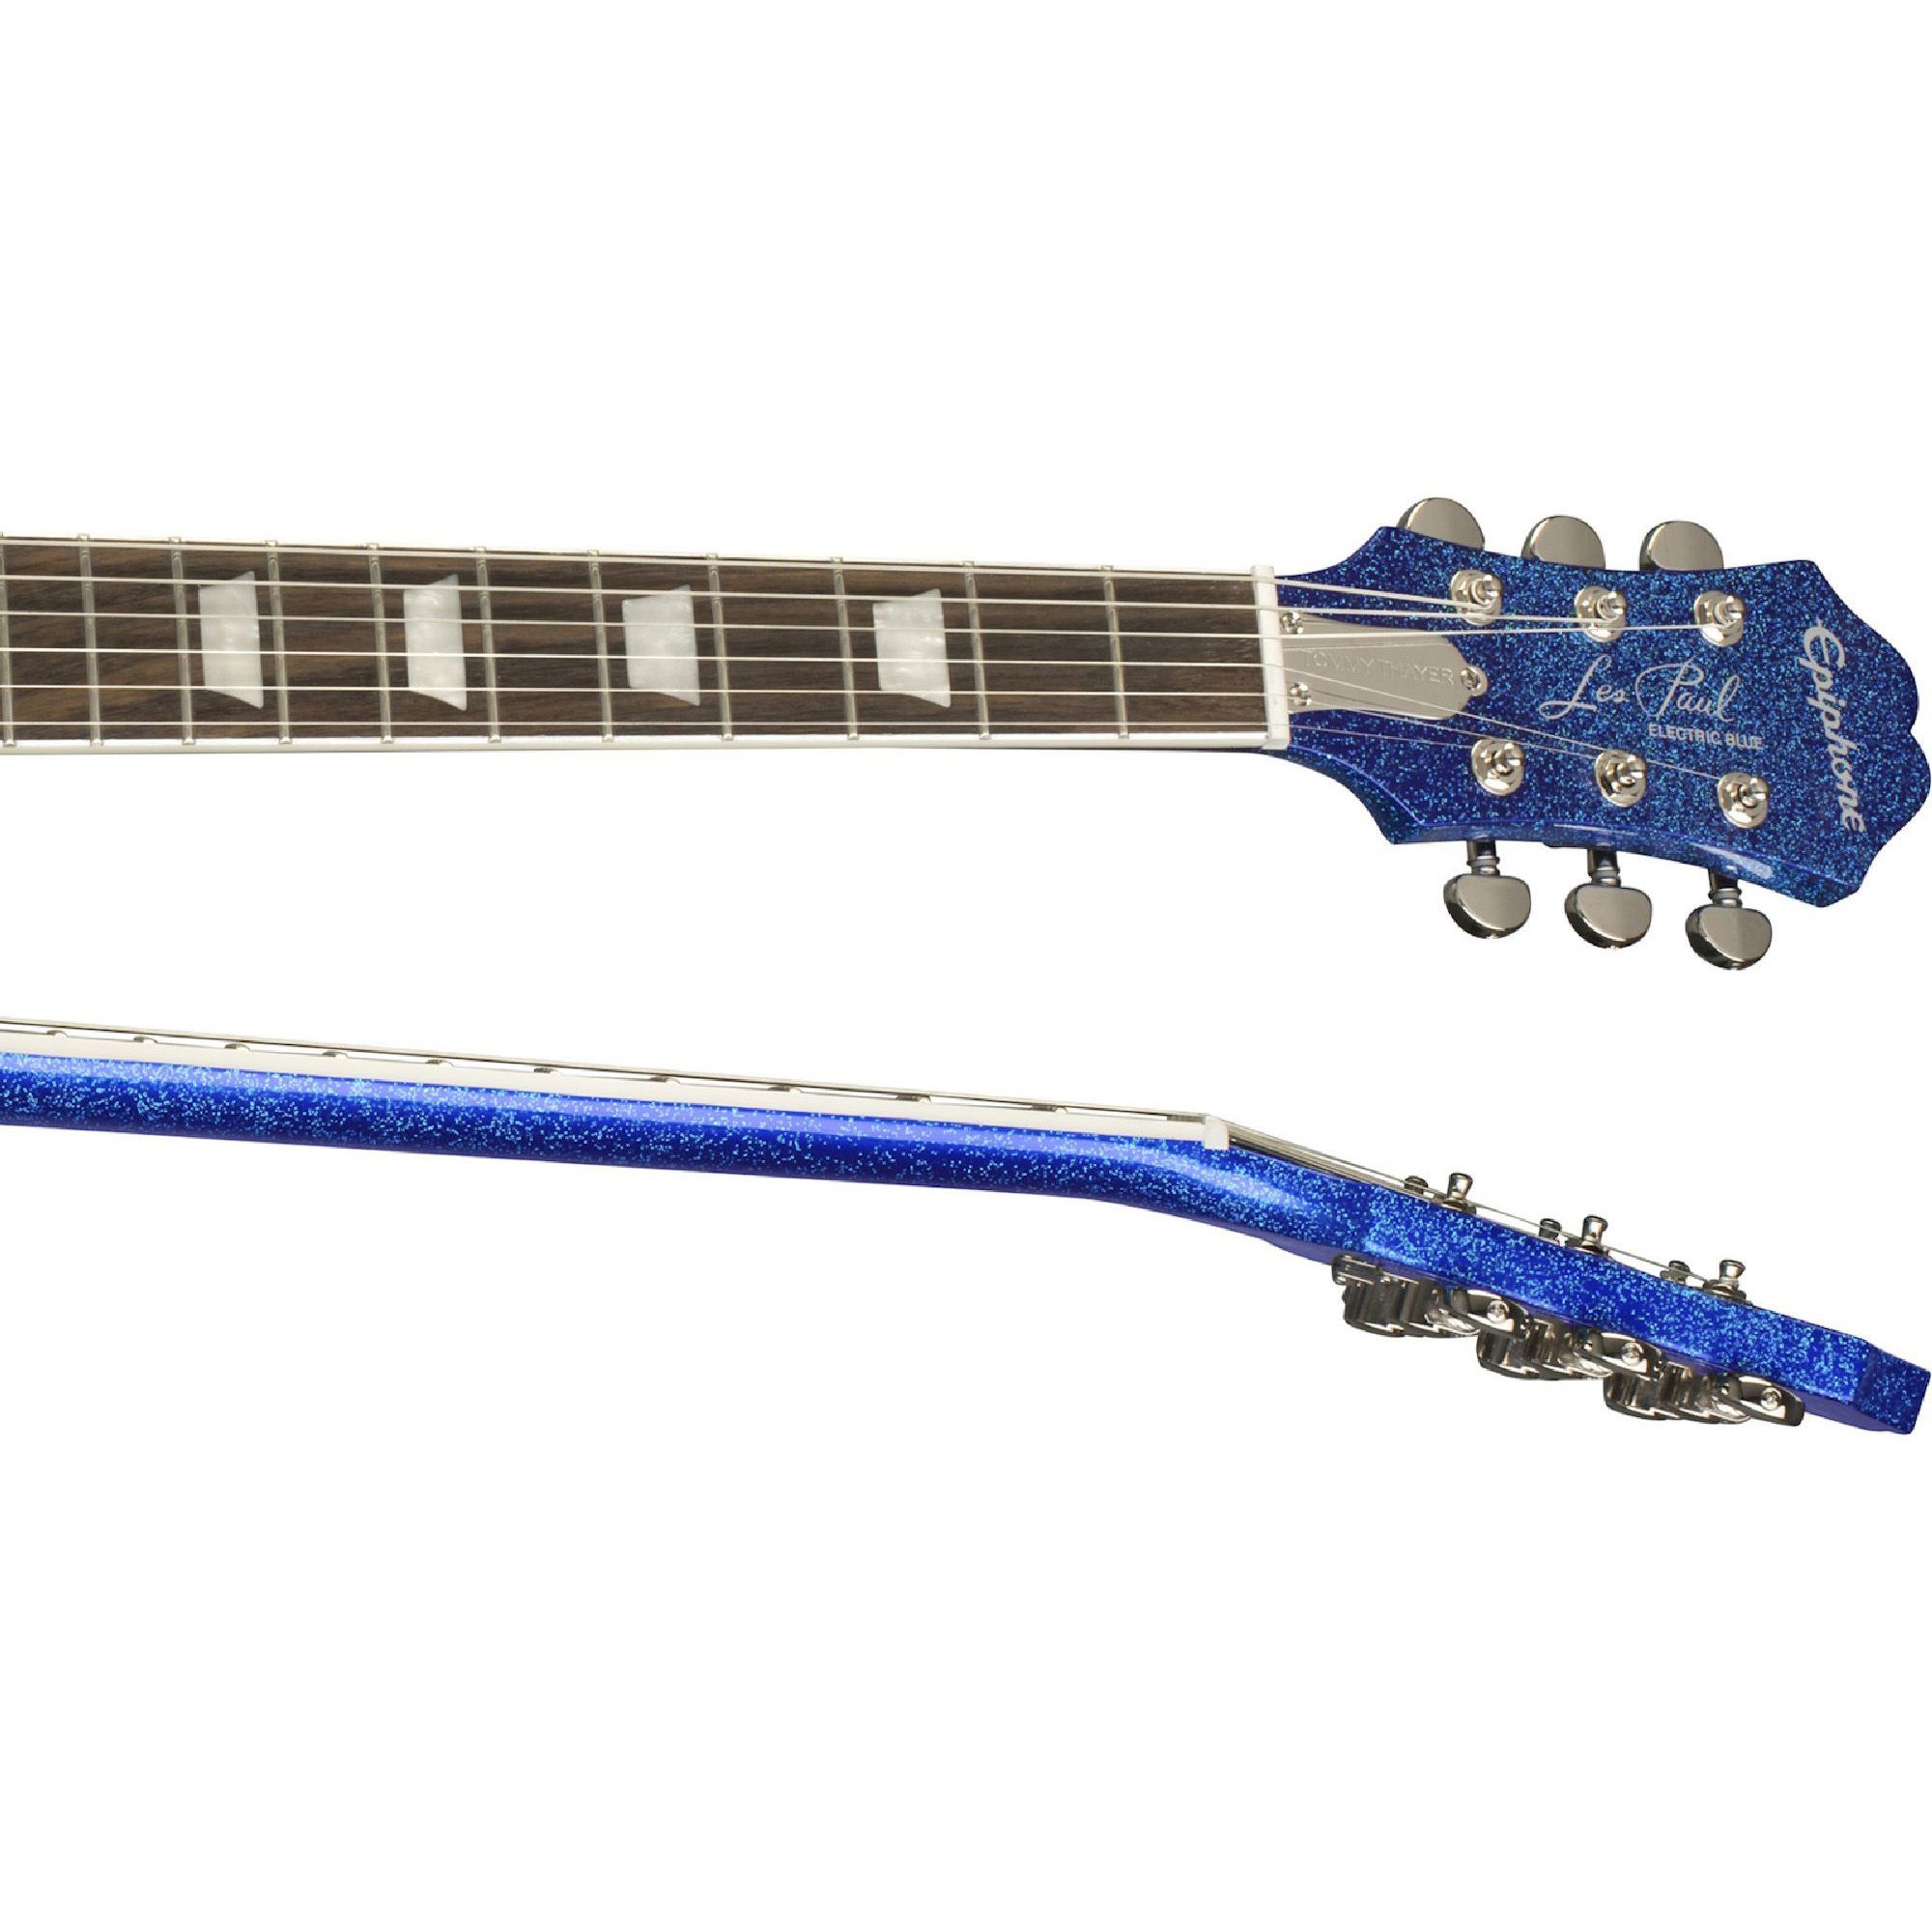 Epiphone Tommy Thayer Electric Blue Les Paul Electric Blue (Incl. Hard Case) Электрогитары